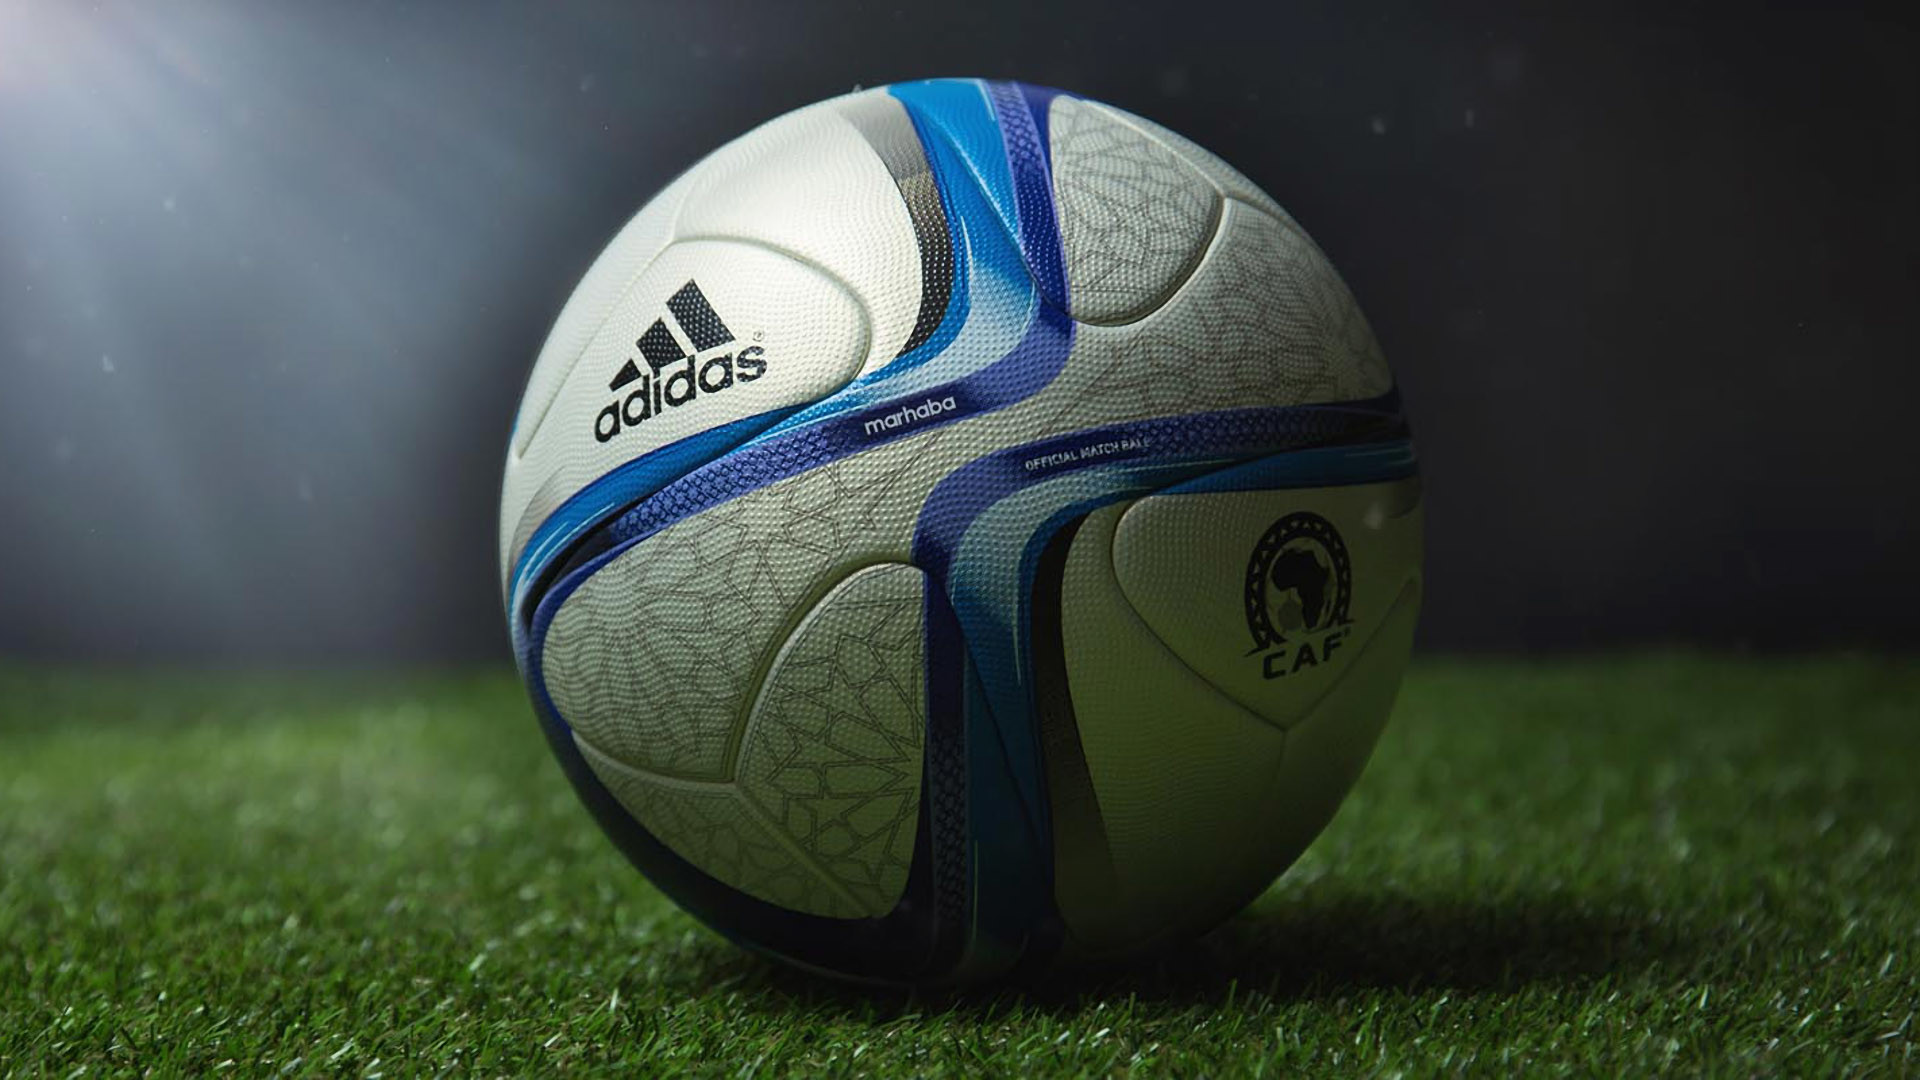 1920x1080 adidas soccer wallpaper for desktop hd wallpapers download free windows  wallpapers amazing picture artwork lovely 1920Ã1080 Wallpaper HD